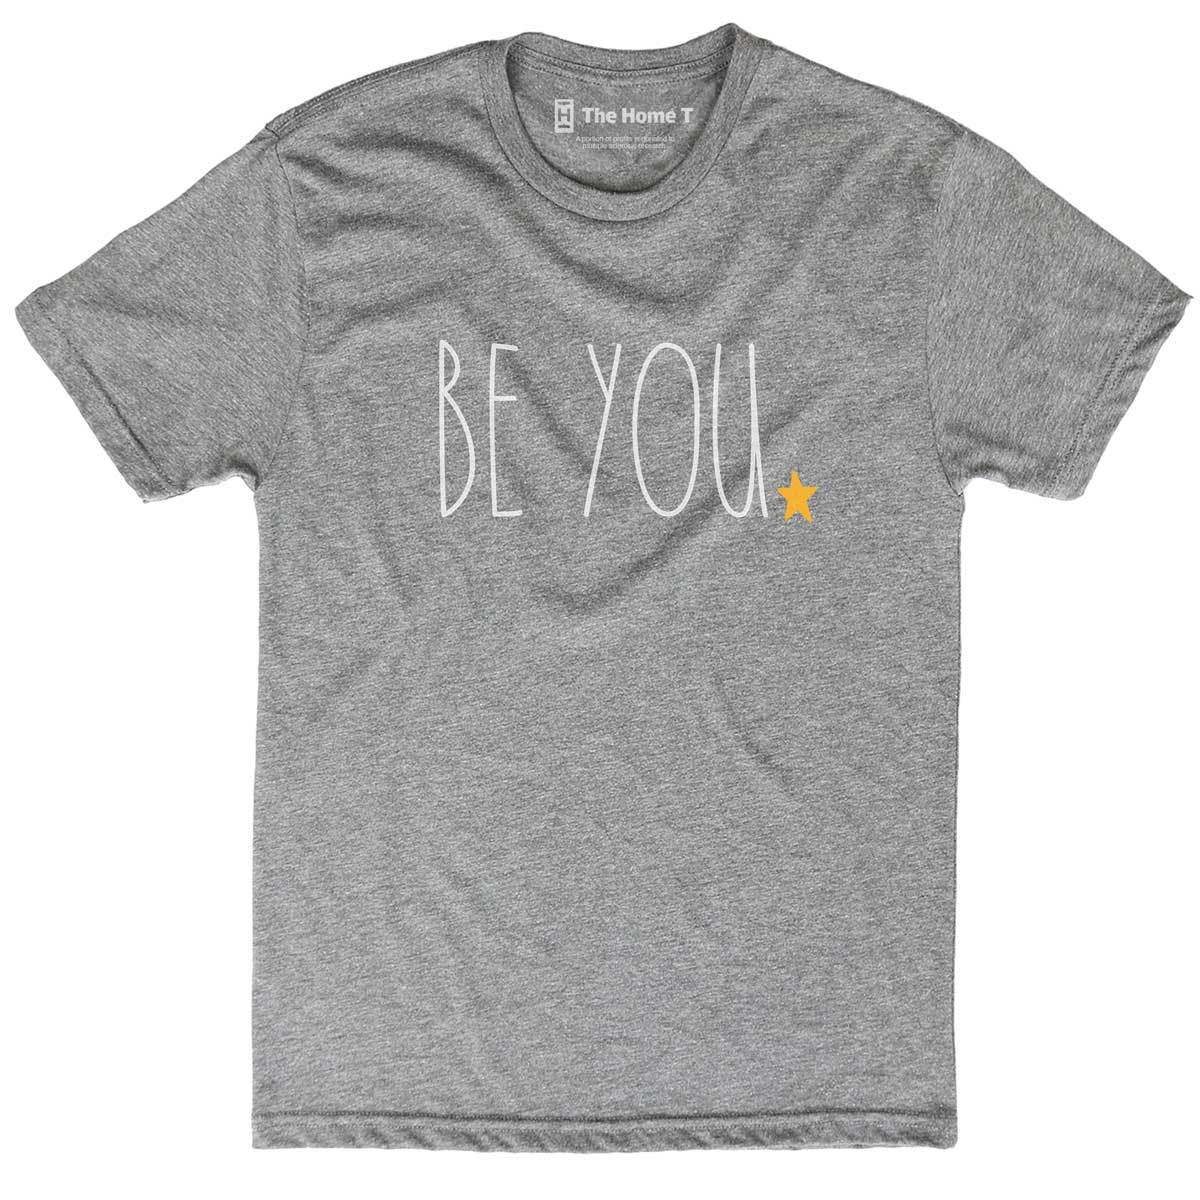 Be You Crew neck The Home T XS Grey T-Shirt